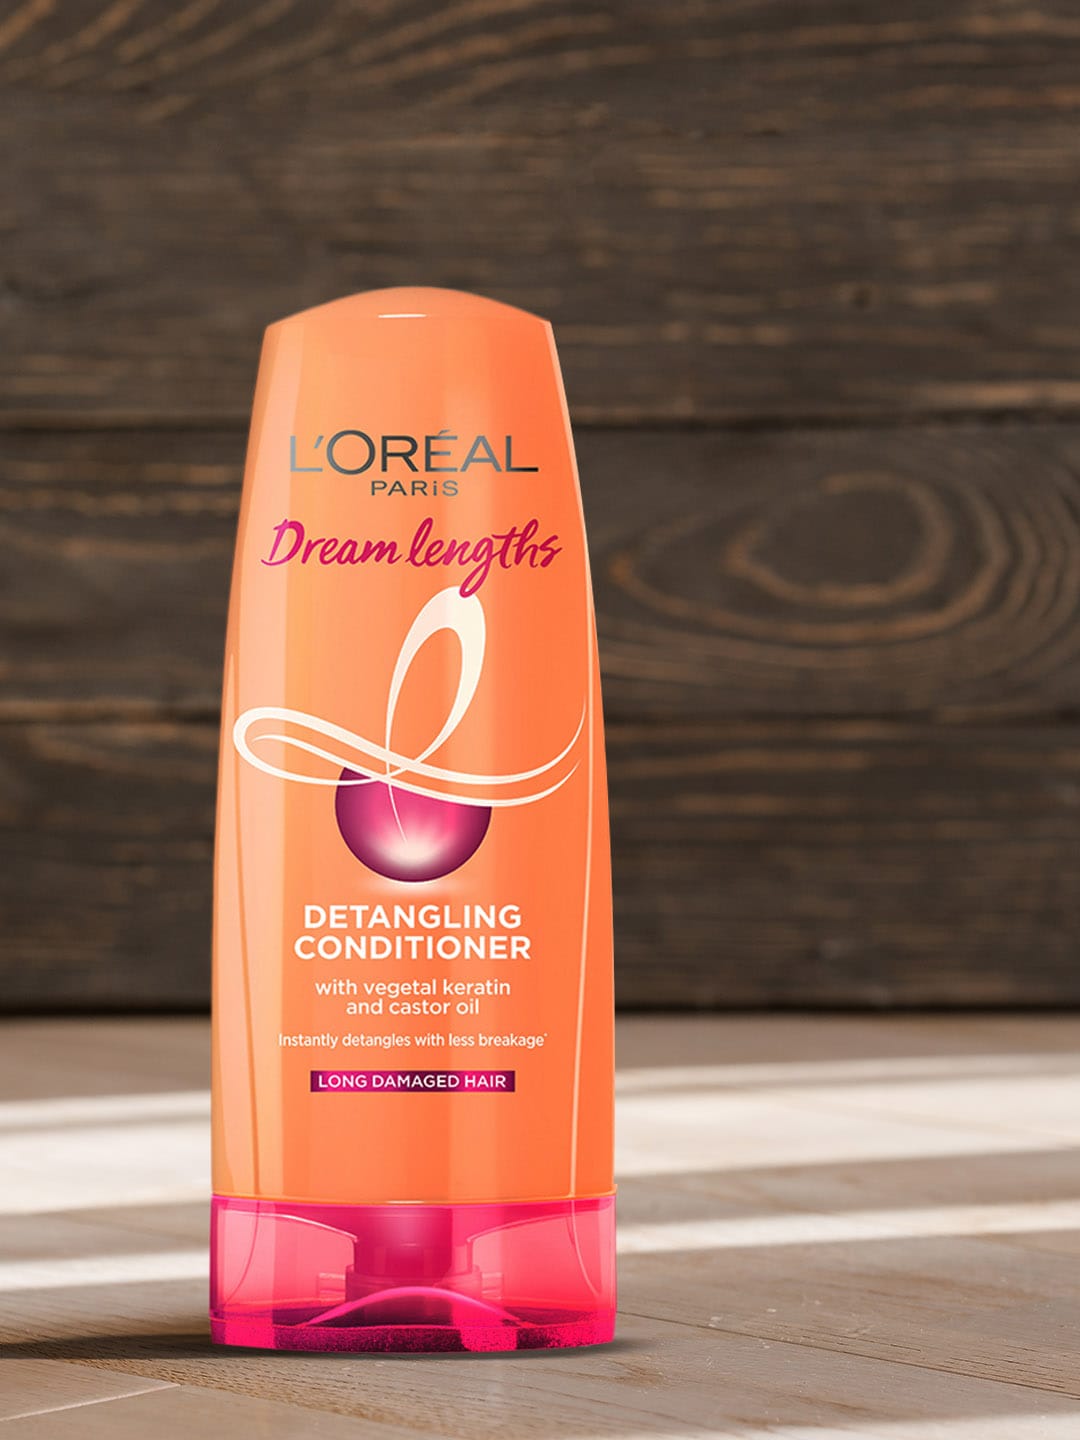 LOreal Paris Dream Lengths Detangling Conditioner with Vegetal Keratin 192.5 ml Price in India